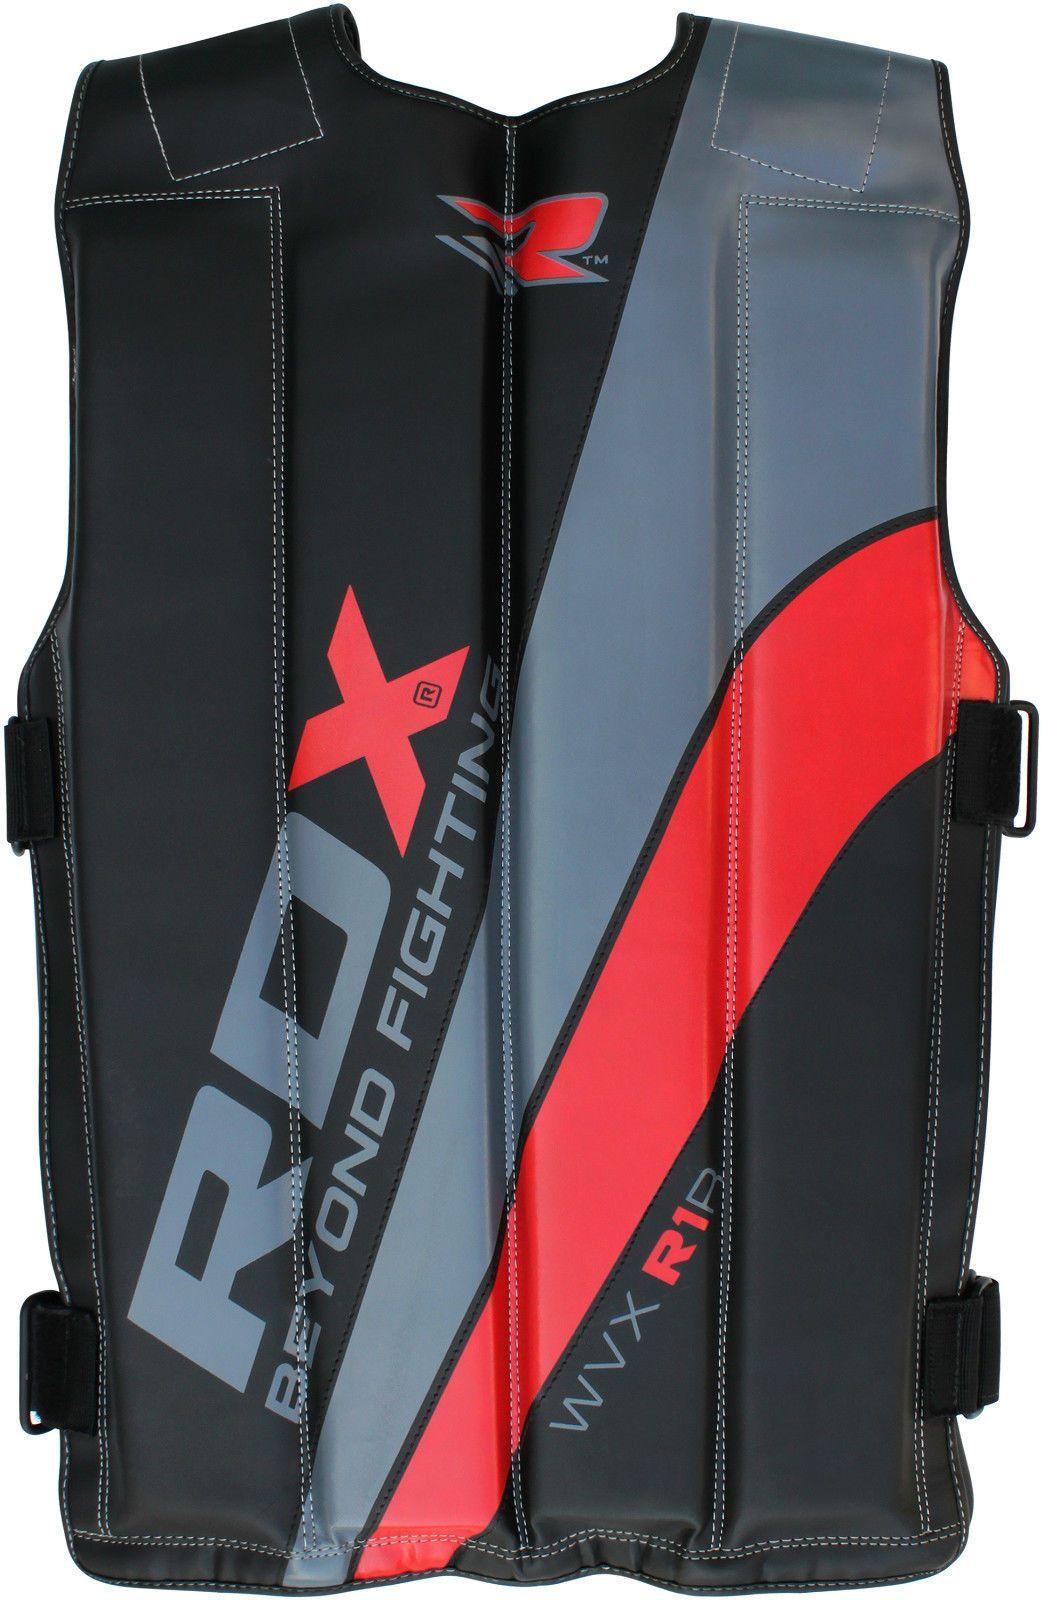 RDX R1 ADJUSTABLE 18KG RED WEIGHTED VEST - Fitness Health 